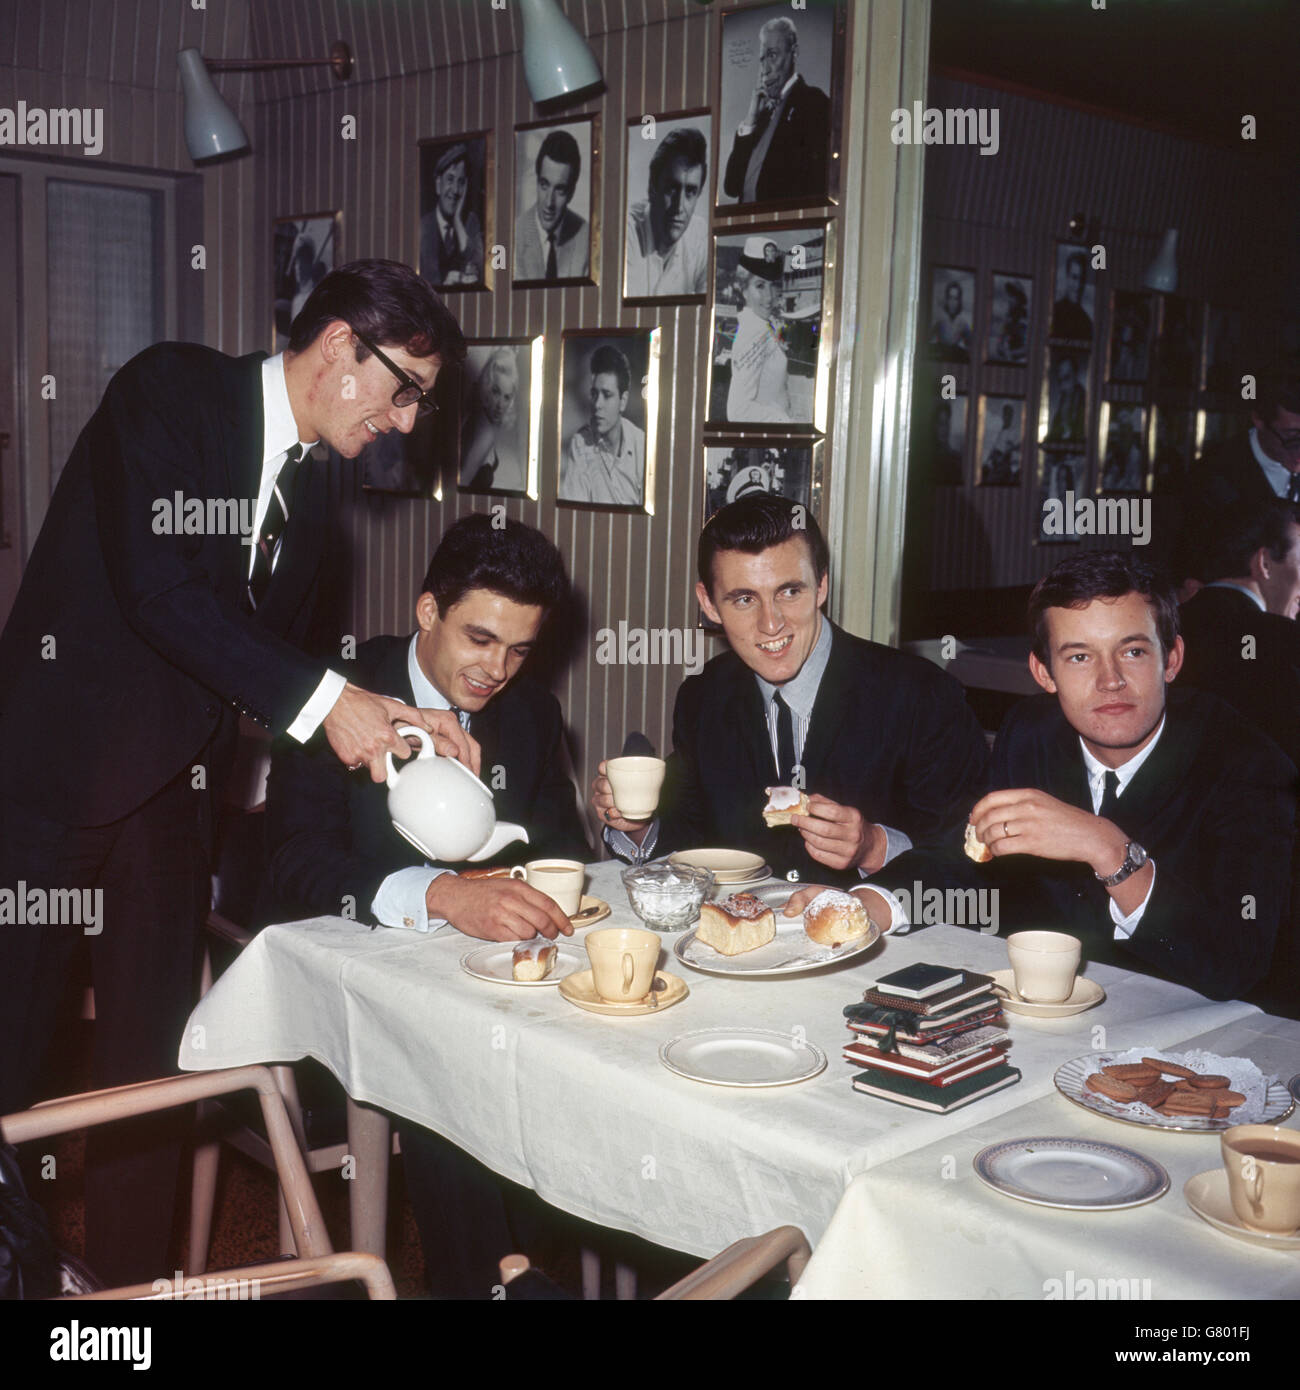 Instrumentalist band 'The Shadows' pictured having tea and cakes in London. (l-r) Hank Marvin serves tea to his bandmates John Rostill, Bruce Welch and Brian Bennett. Stock Photo